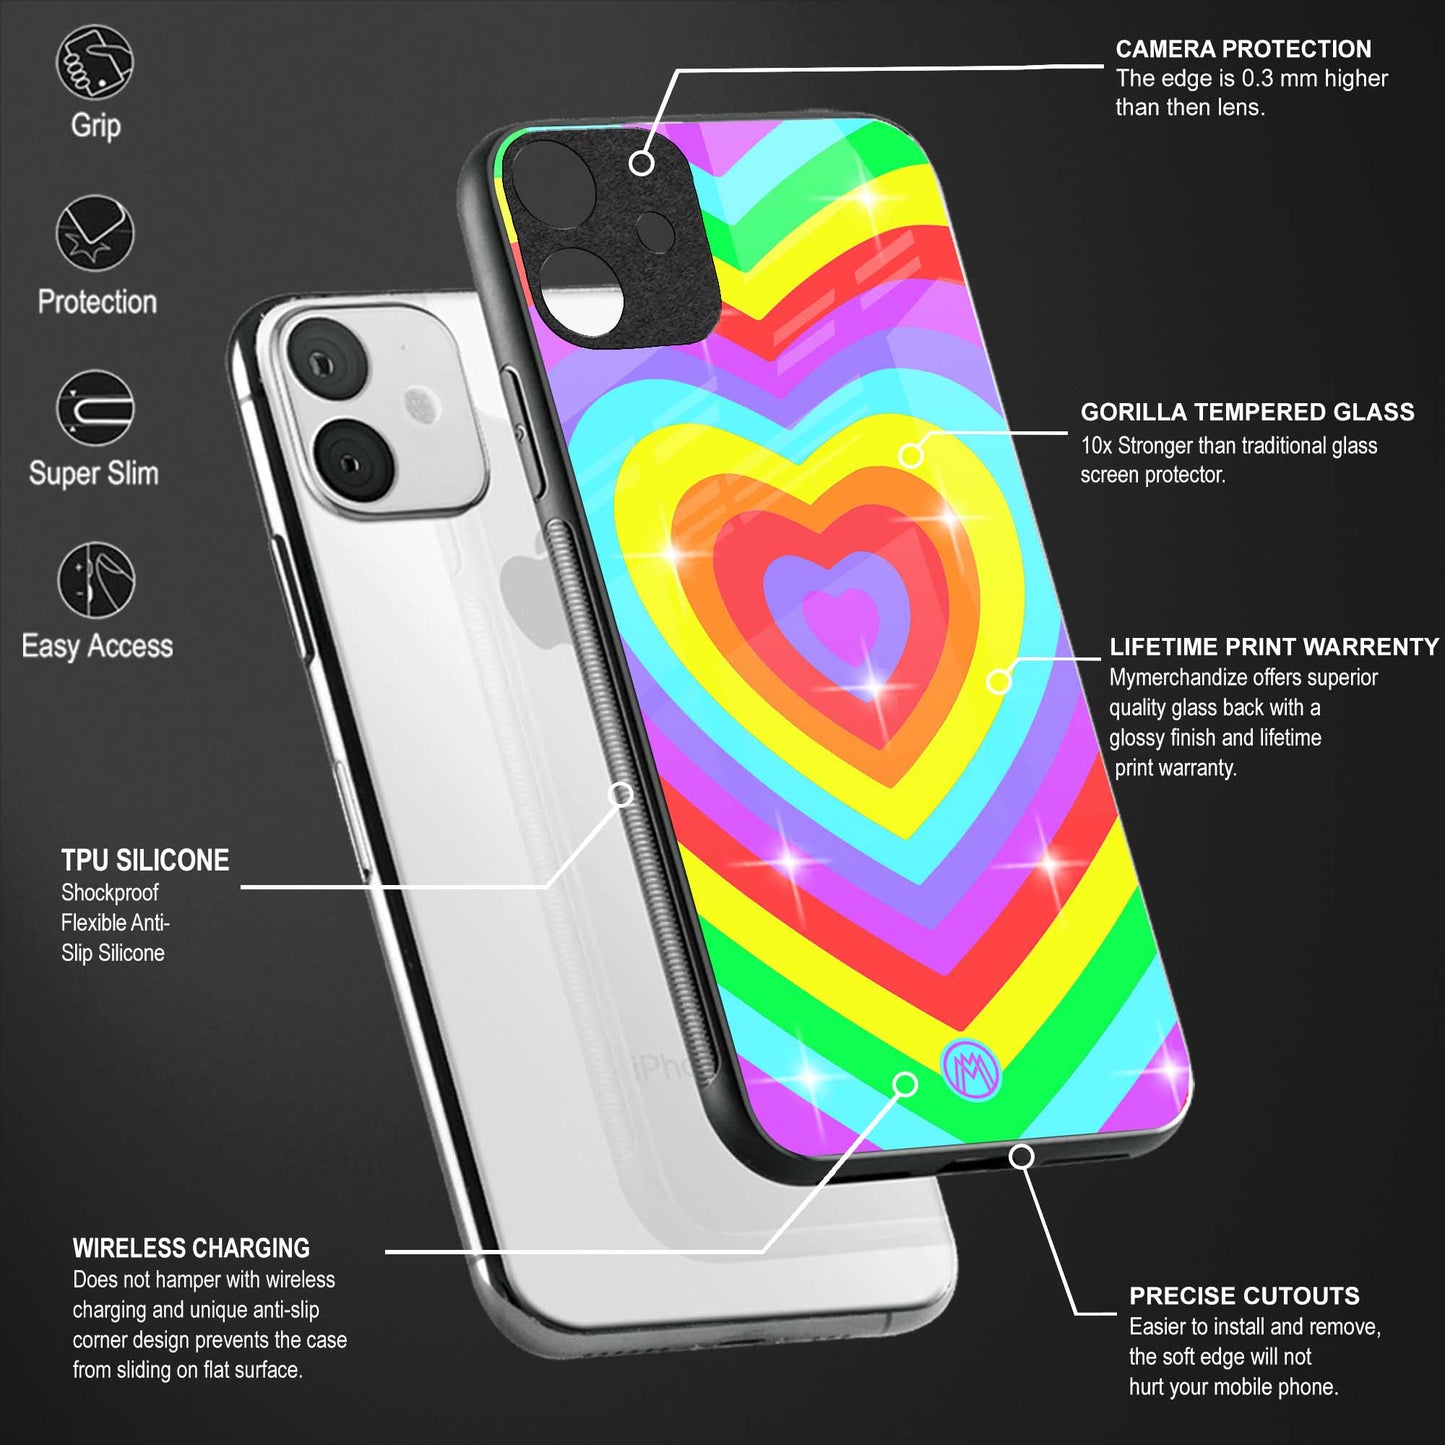 rainbow y2k hearts aesthetic back phone cover | glass case for vivo v25-5g